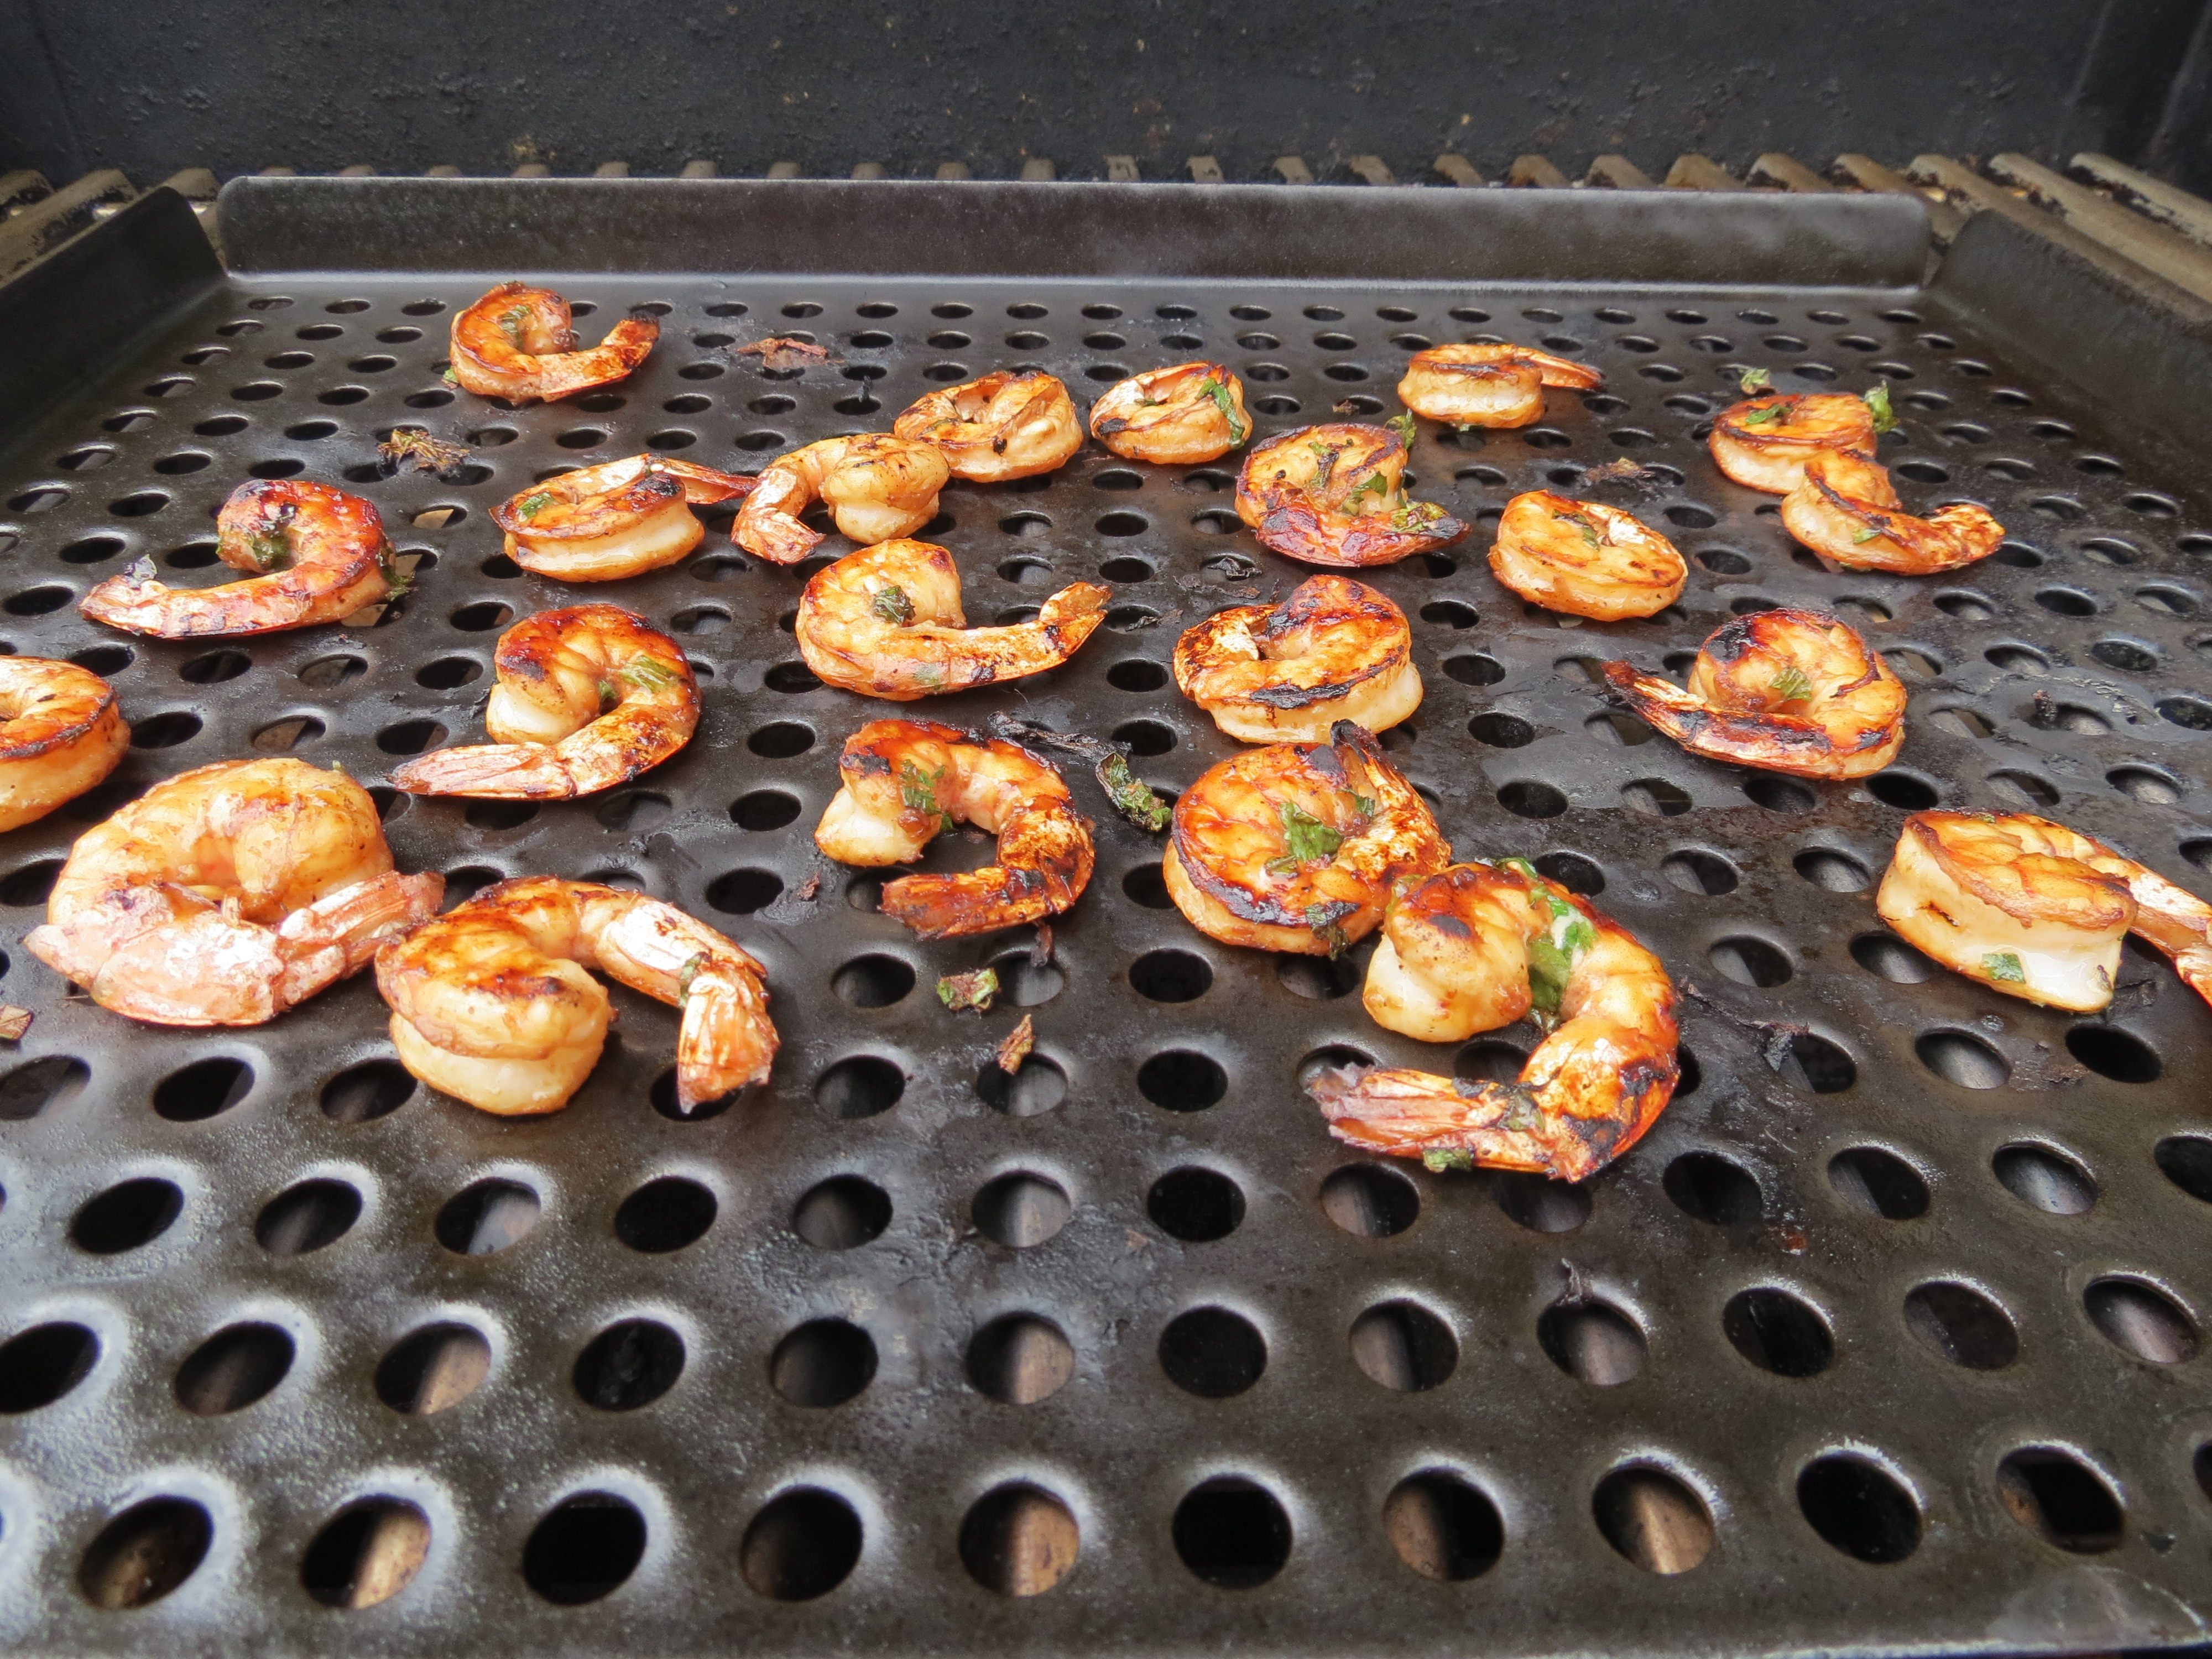 Shrimp On The Grill With An Asian Dipping Sauce The Lit Kitchen,How To Play Gin Rummy Video